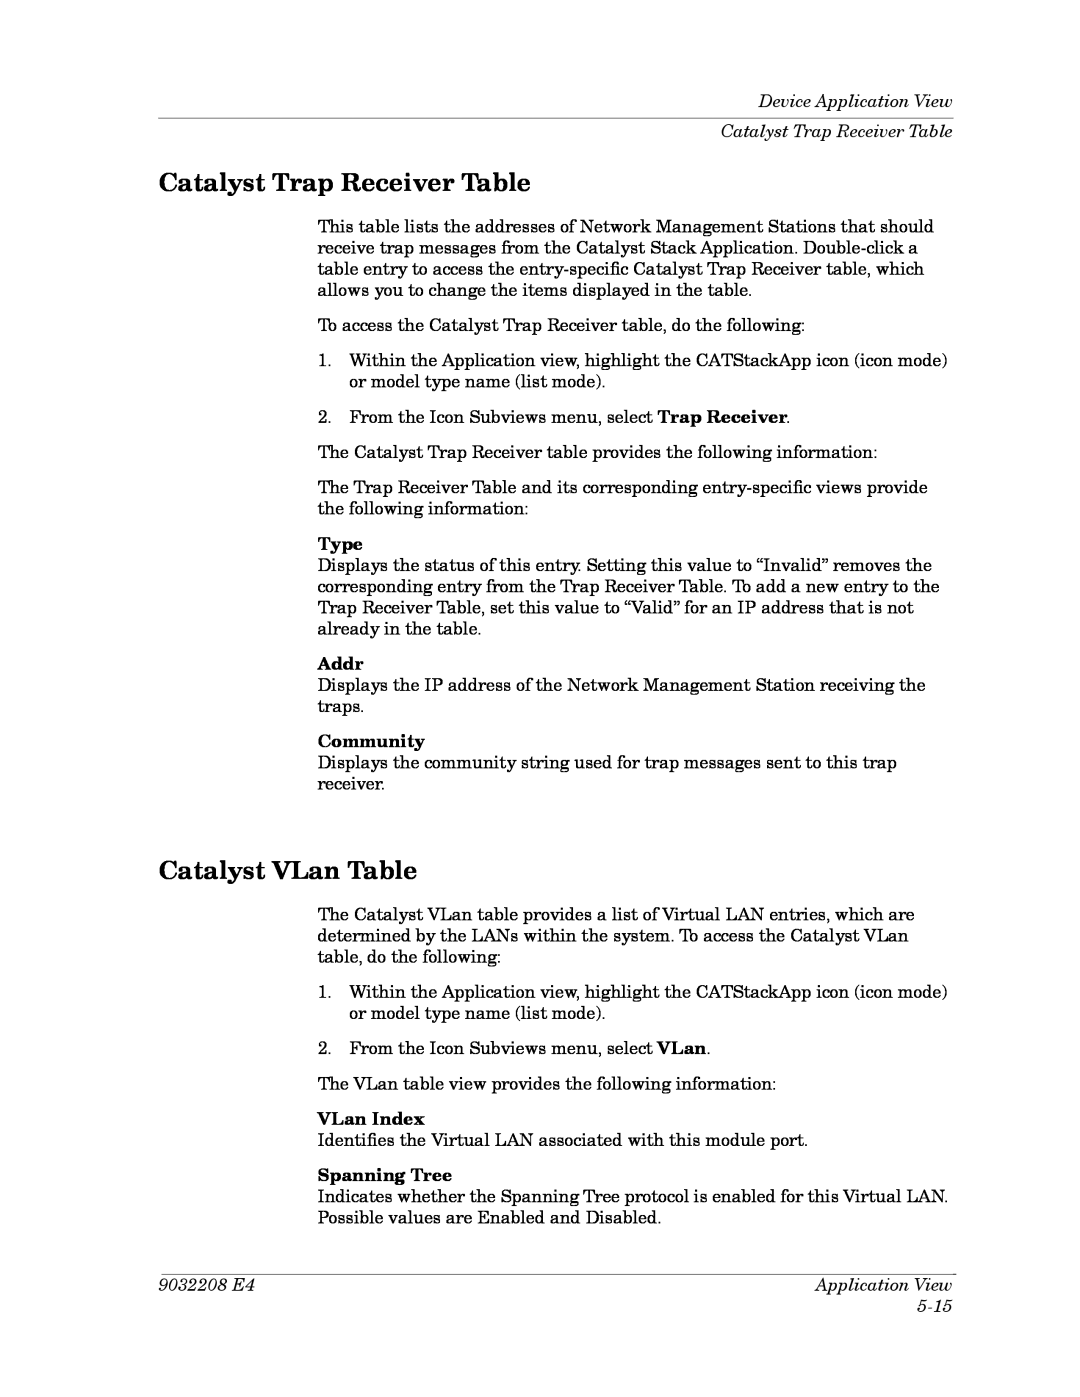 Cabletron Systems 5000, 5500 Catalyst Trap Receiver Table, Catalyst VLan Table, Addr, Community, VLan Index, Spanning Tree 